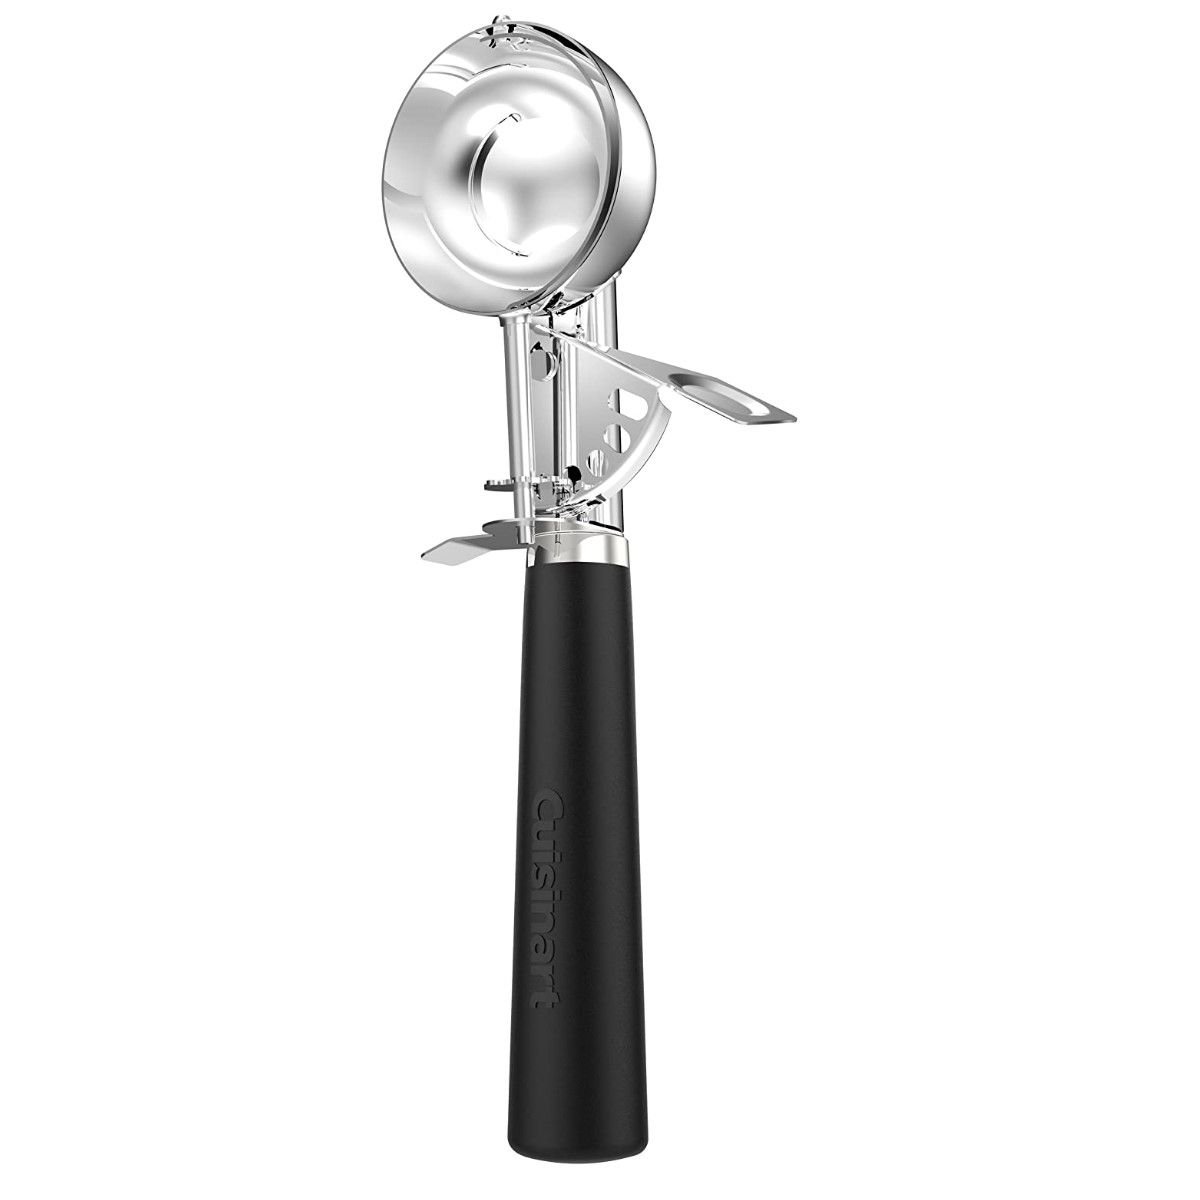 Cookie Dough Trigger Scoop: 1 oz. Stainless Steel Scooper Great for Baking, Ice Cream, Desserts and More